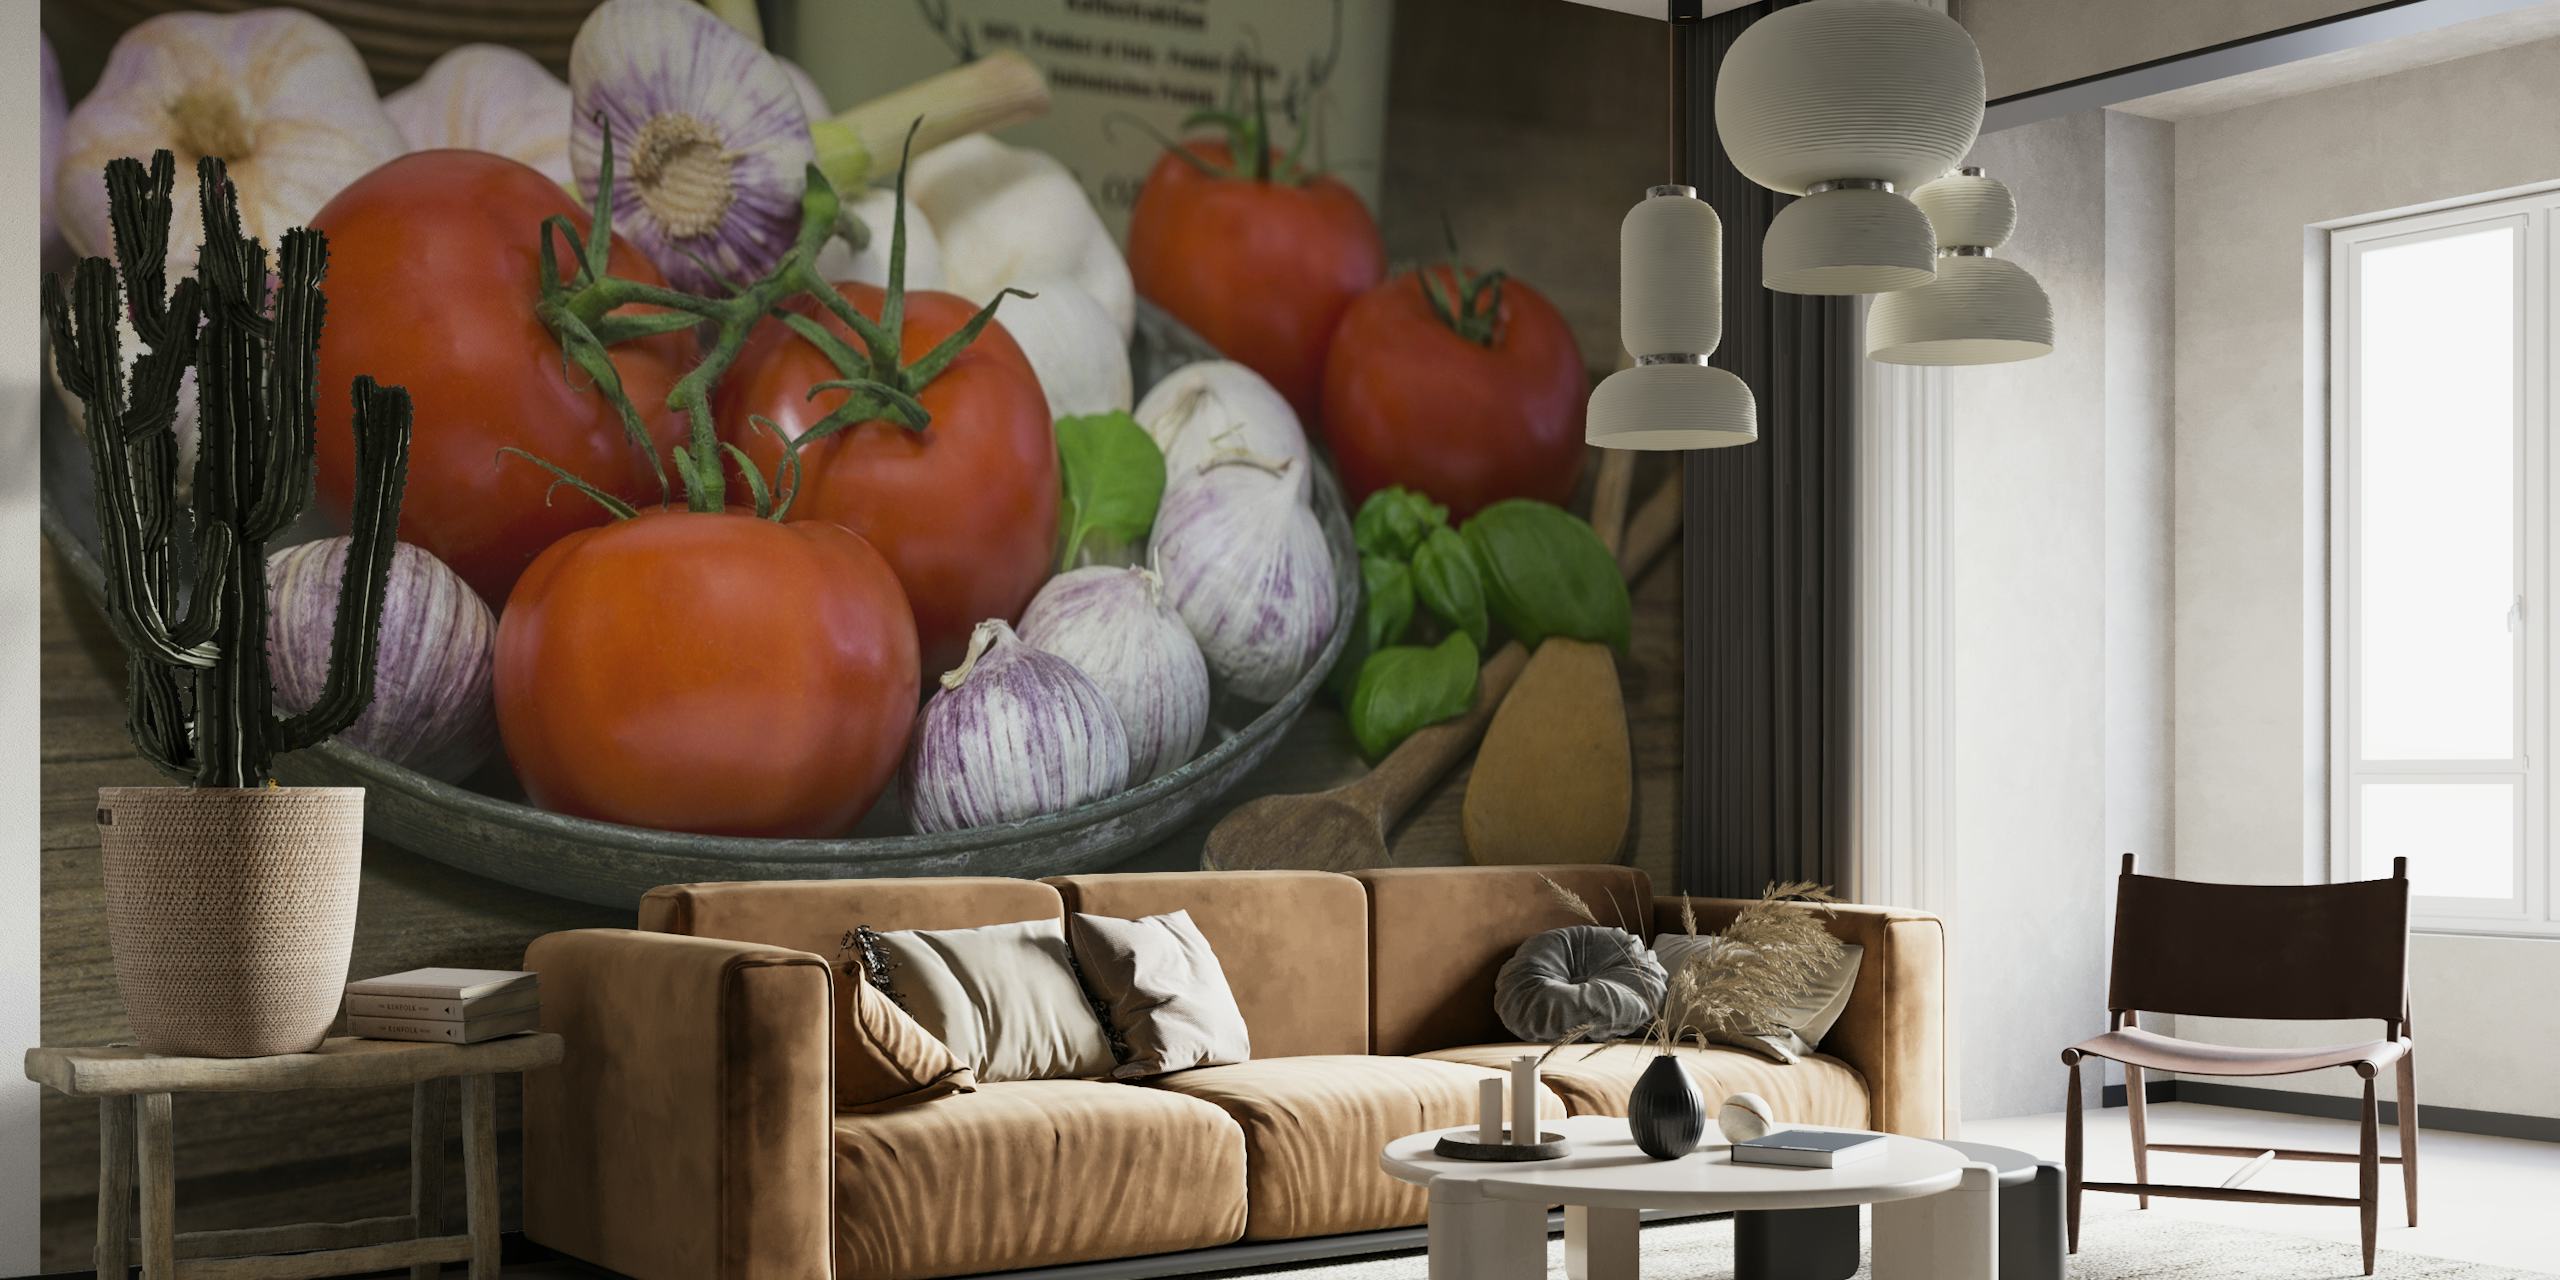 Wall mural of Italian cuisine essentials with tomatoes, garlic, and basil on a wooden table